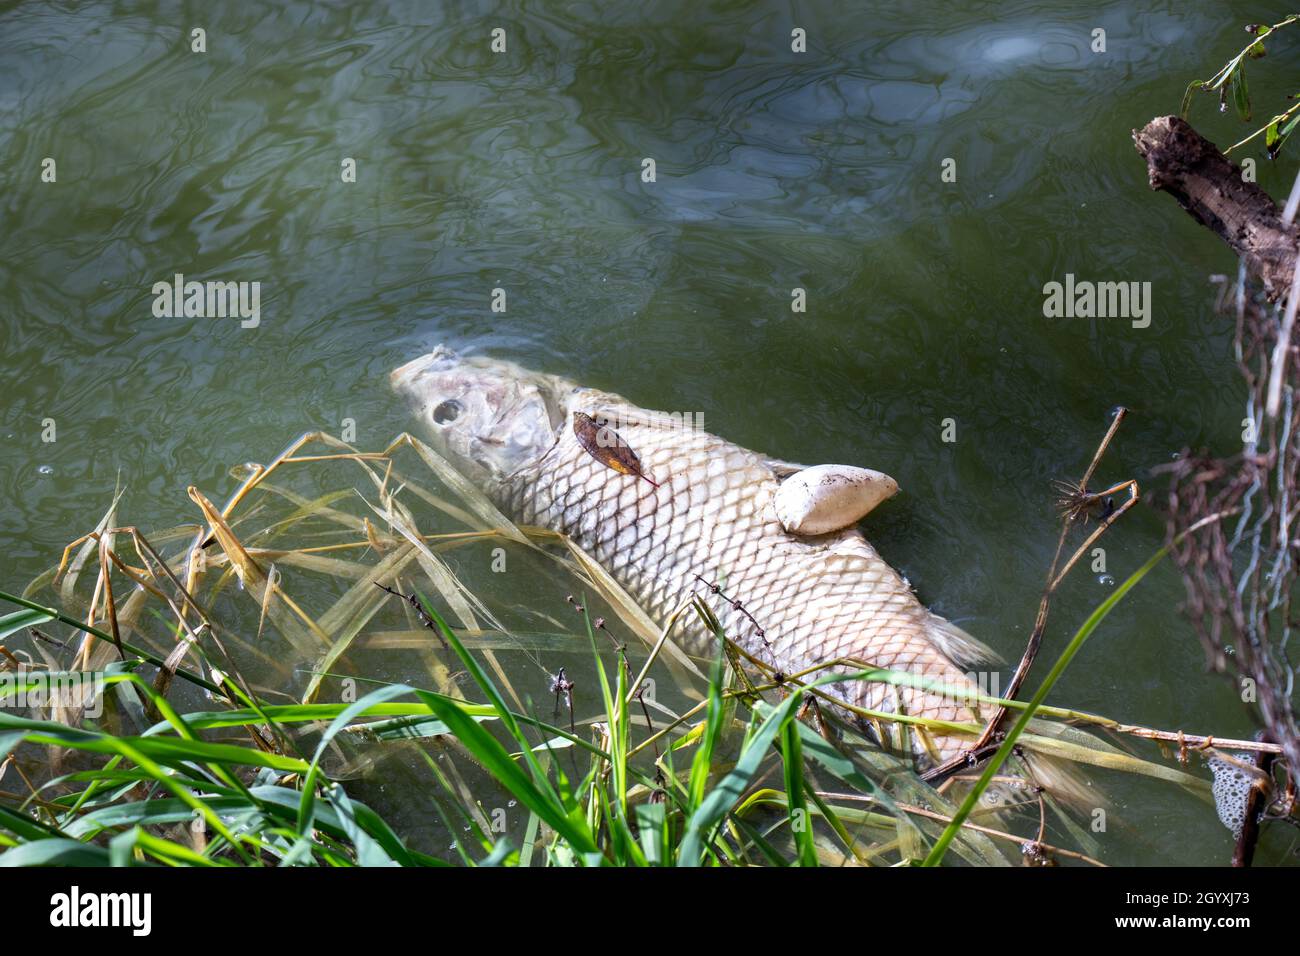 One of a dosens  dead fish (common carp) which have been found floating around Lagoon Lake in Stanley Park in October 2021 Stock Photo